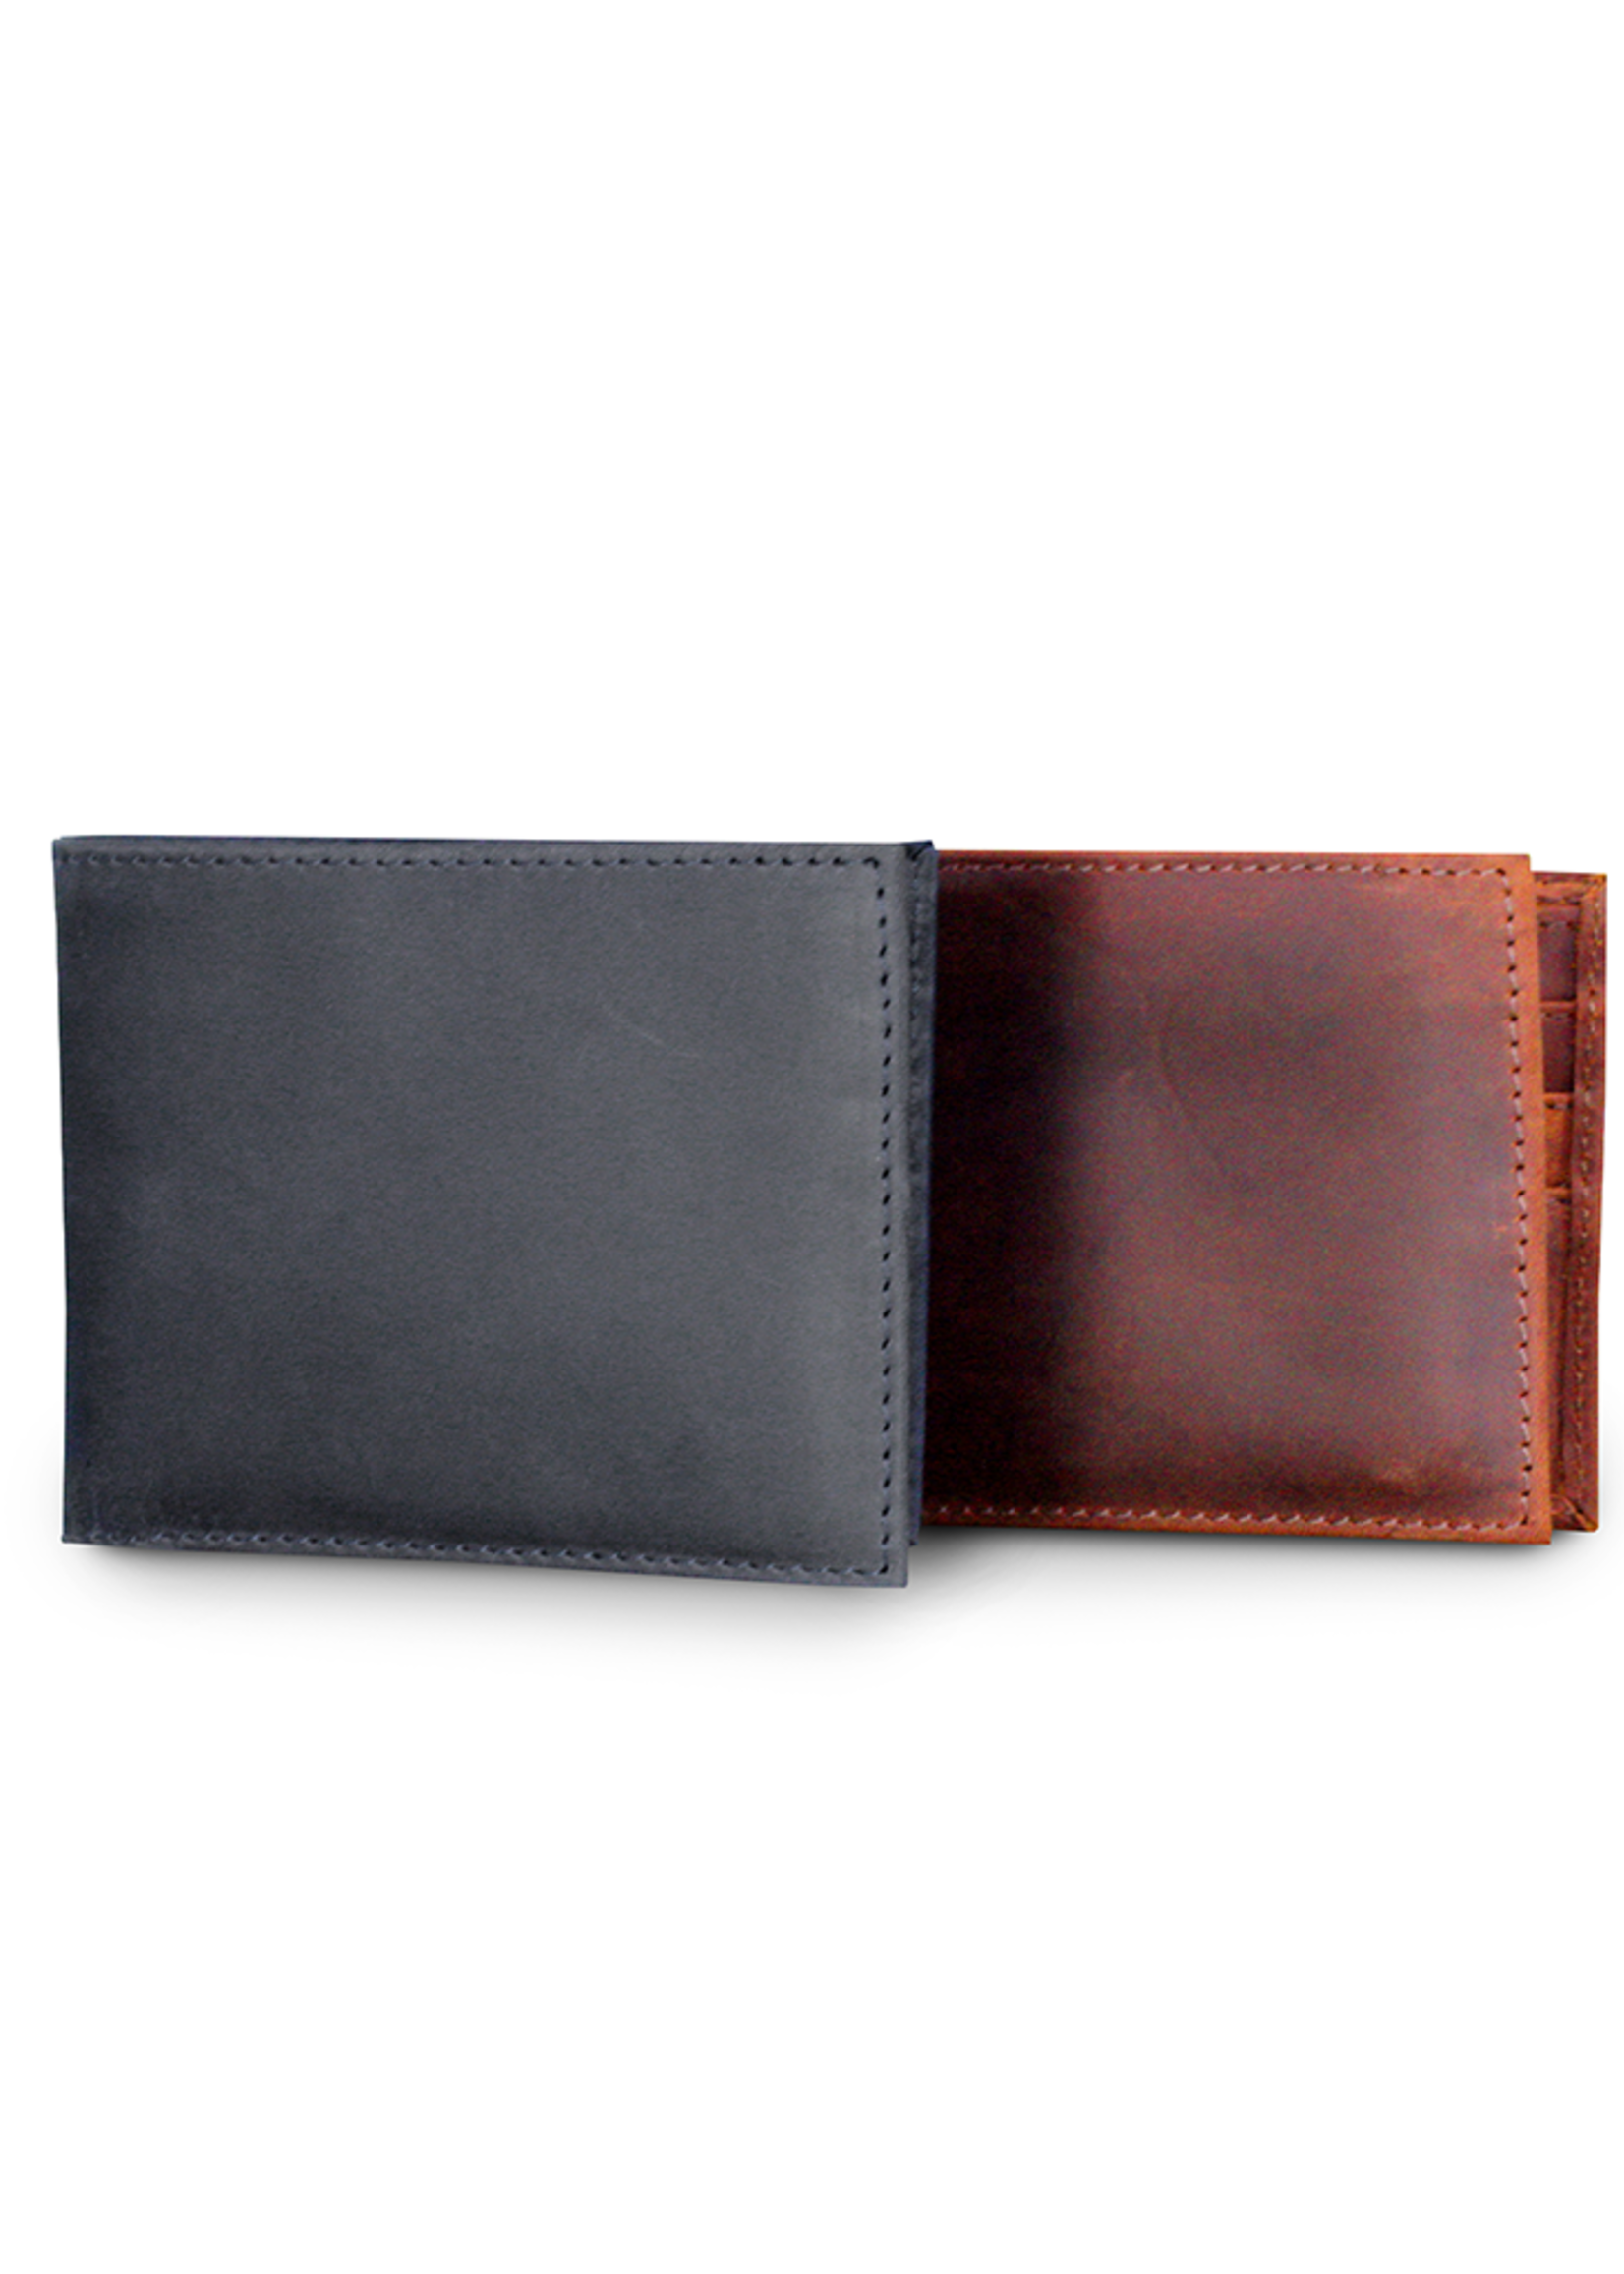 Leather Bi-Fold Wallet - Saddle Brown from HumanKind Fair Trade